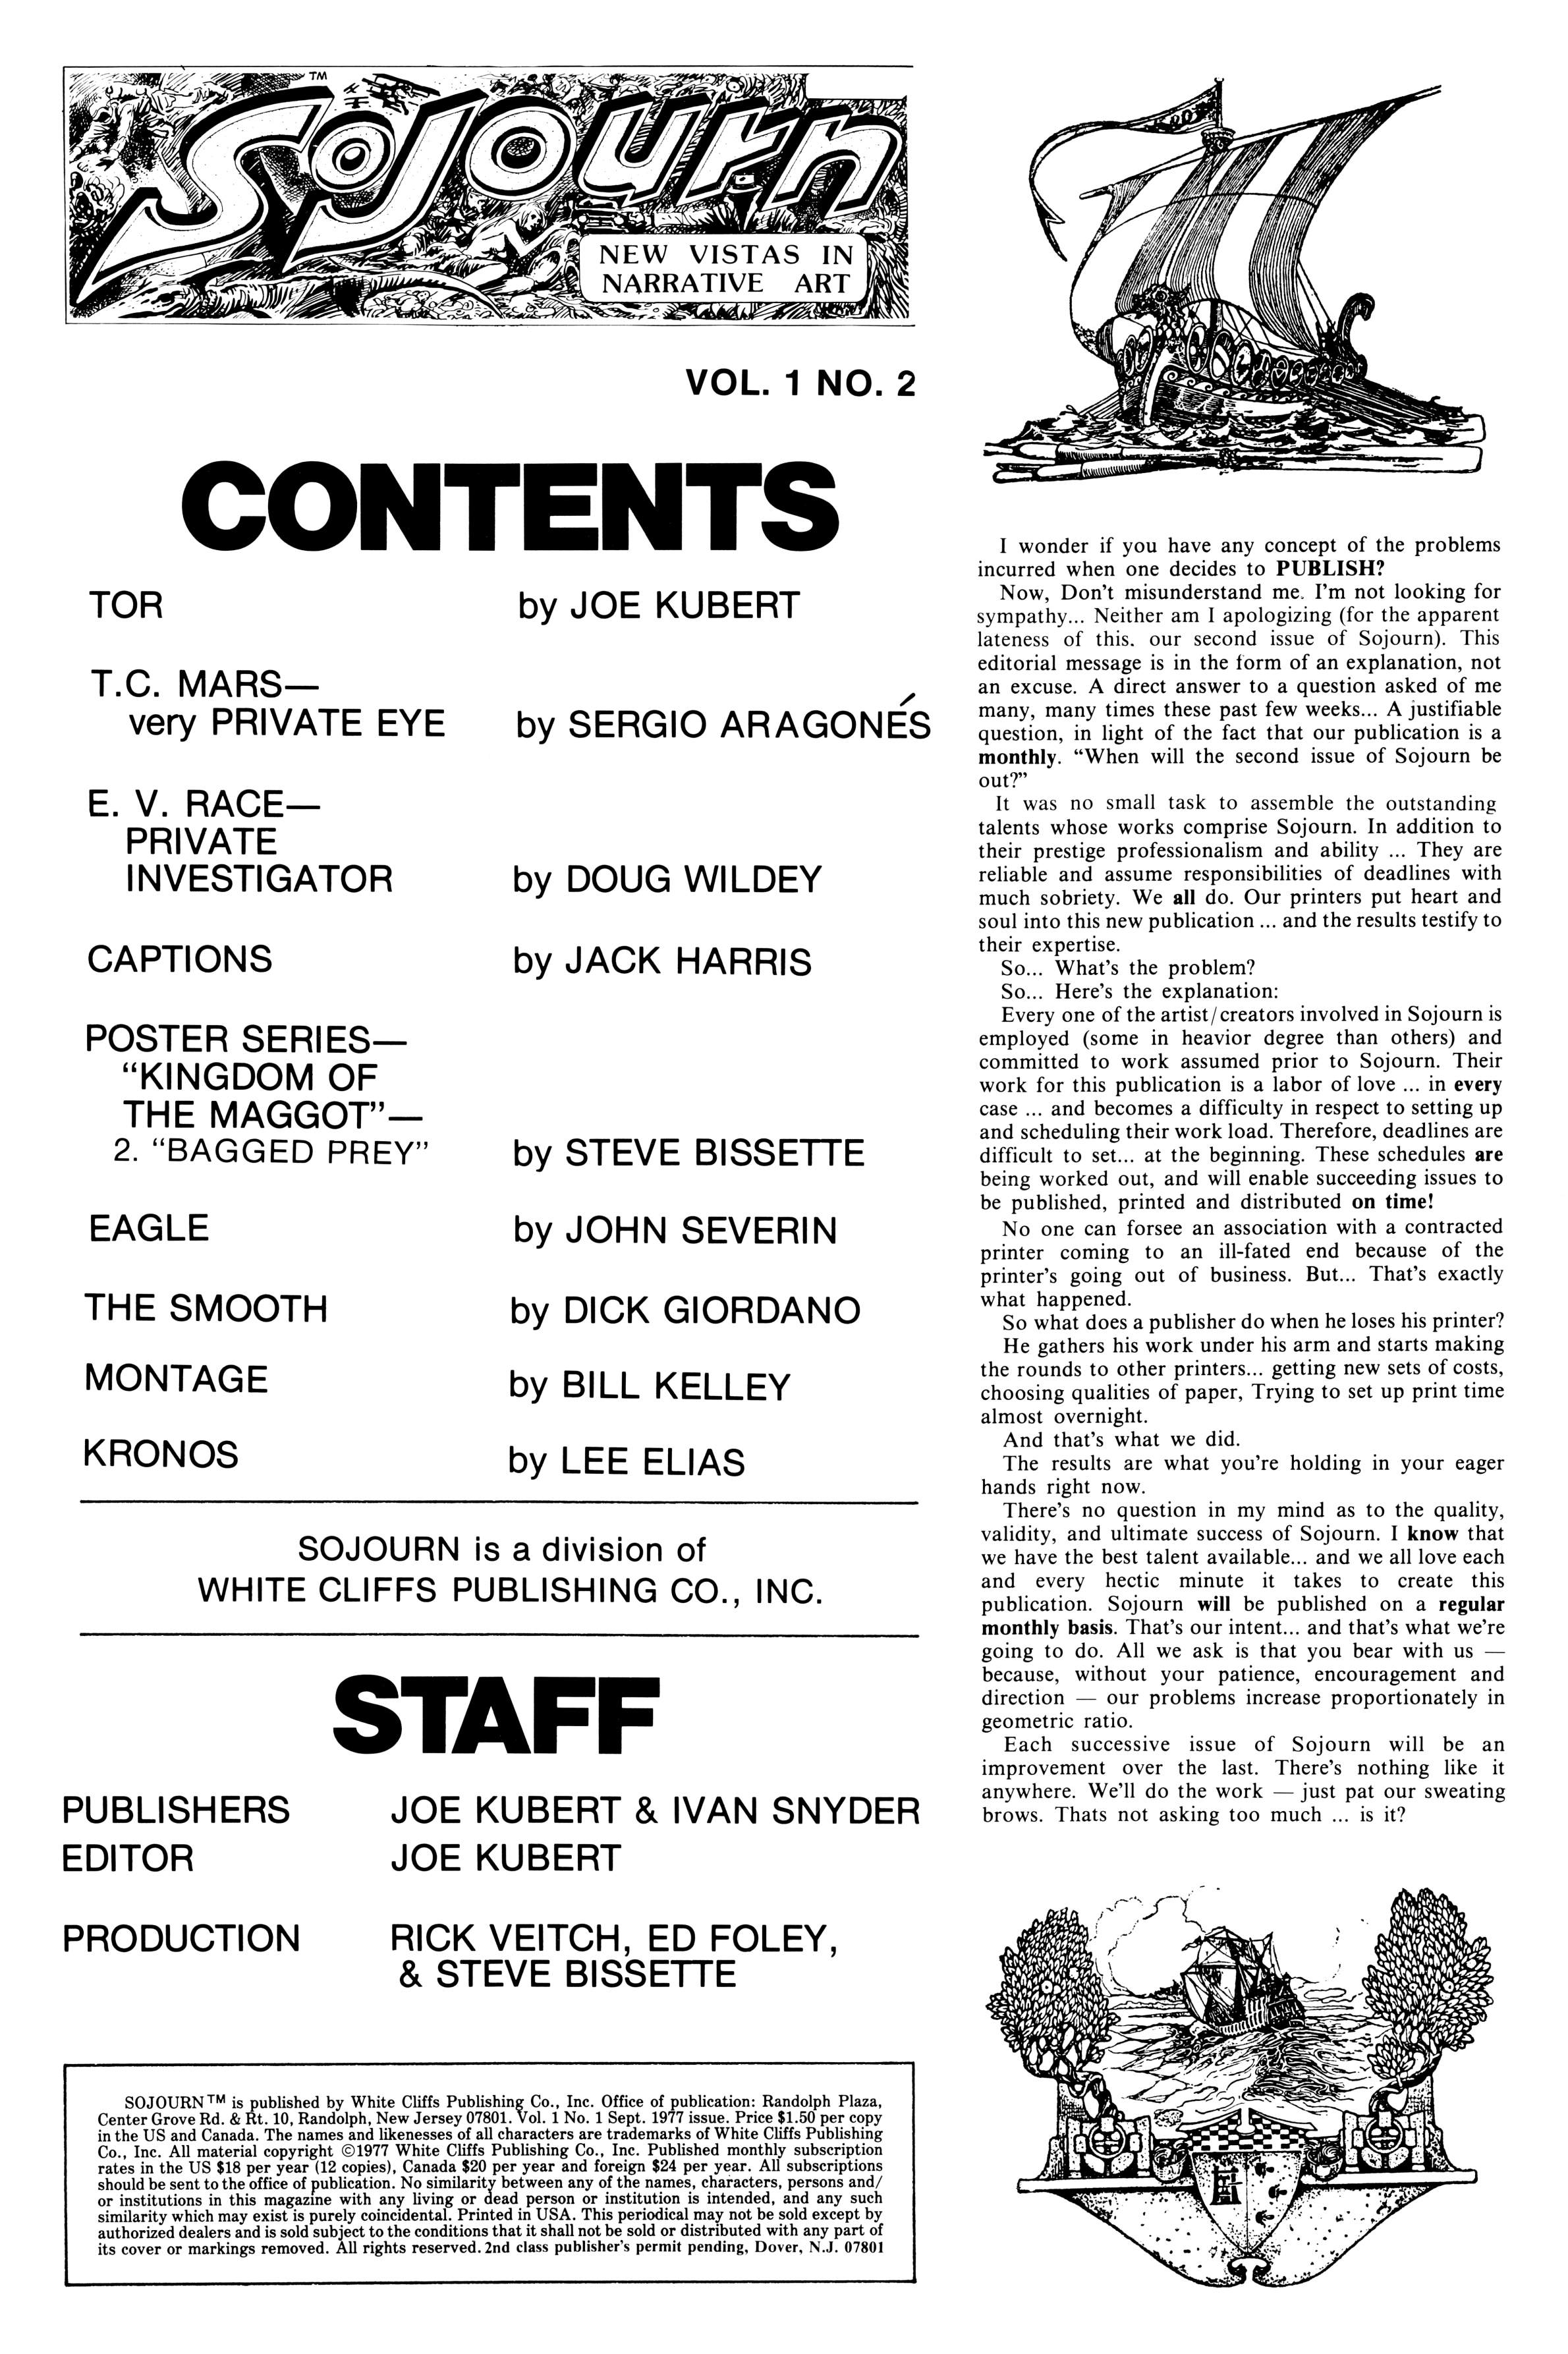 Read online Sojourn (1977) comic -  Issue #2 - 2